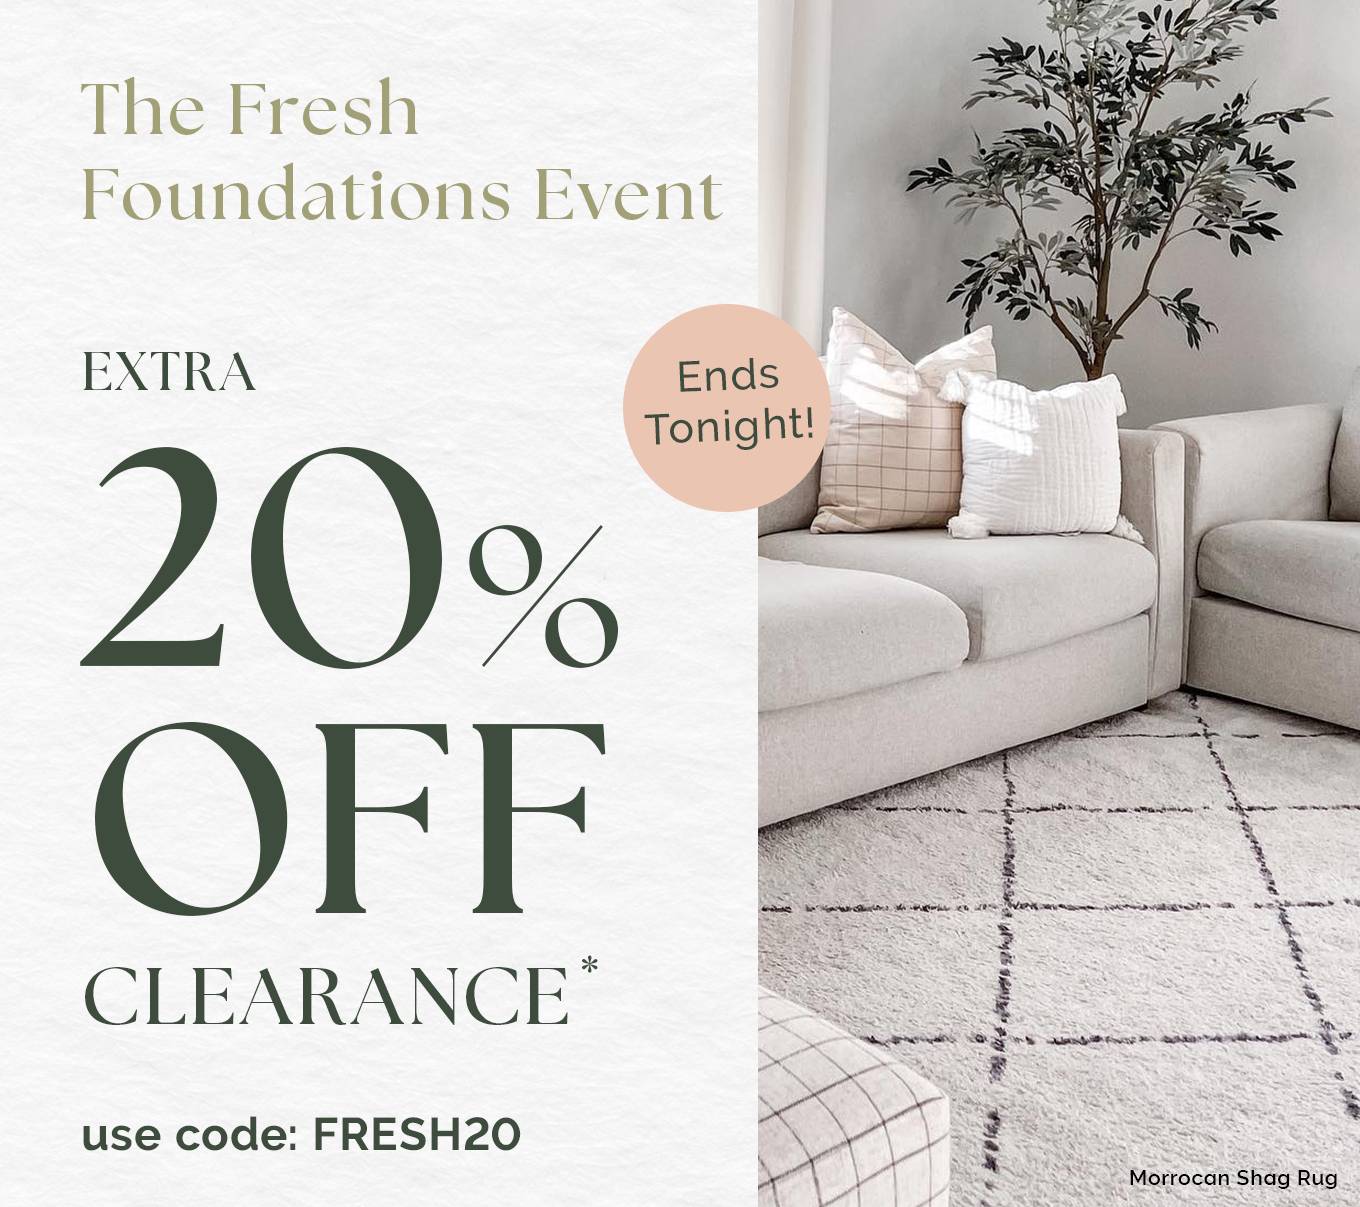 ENDS TONIGHT! The Fresh Foundations Event | EXTRA 20% OFF CLEARANCE* | use code: FRESH20